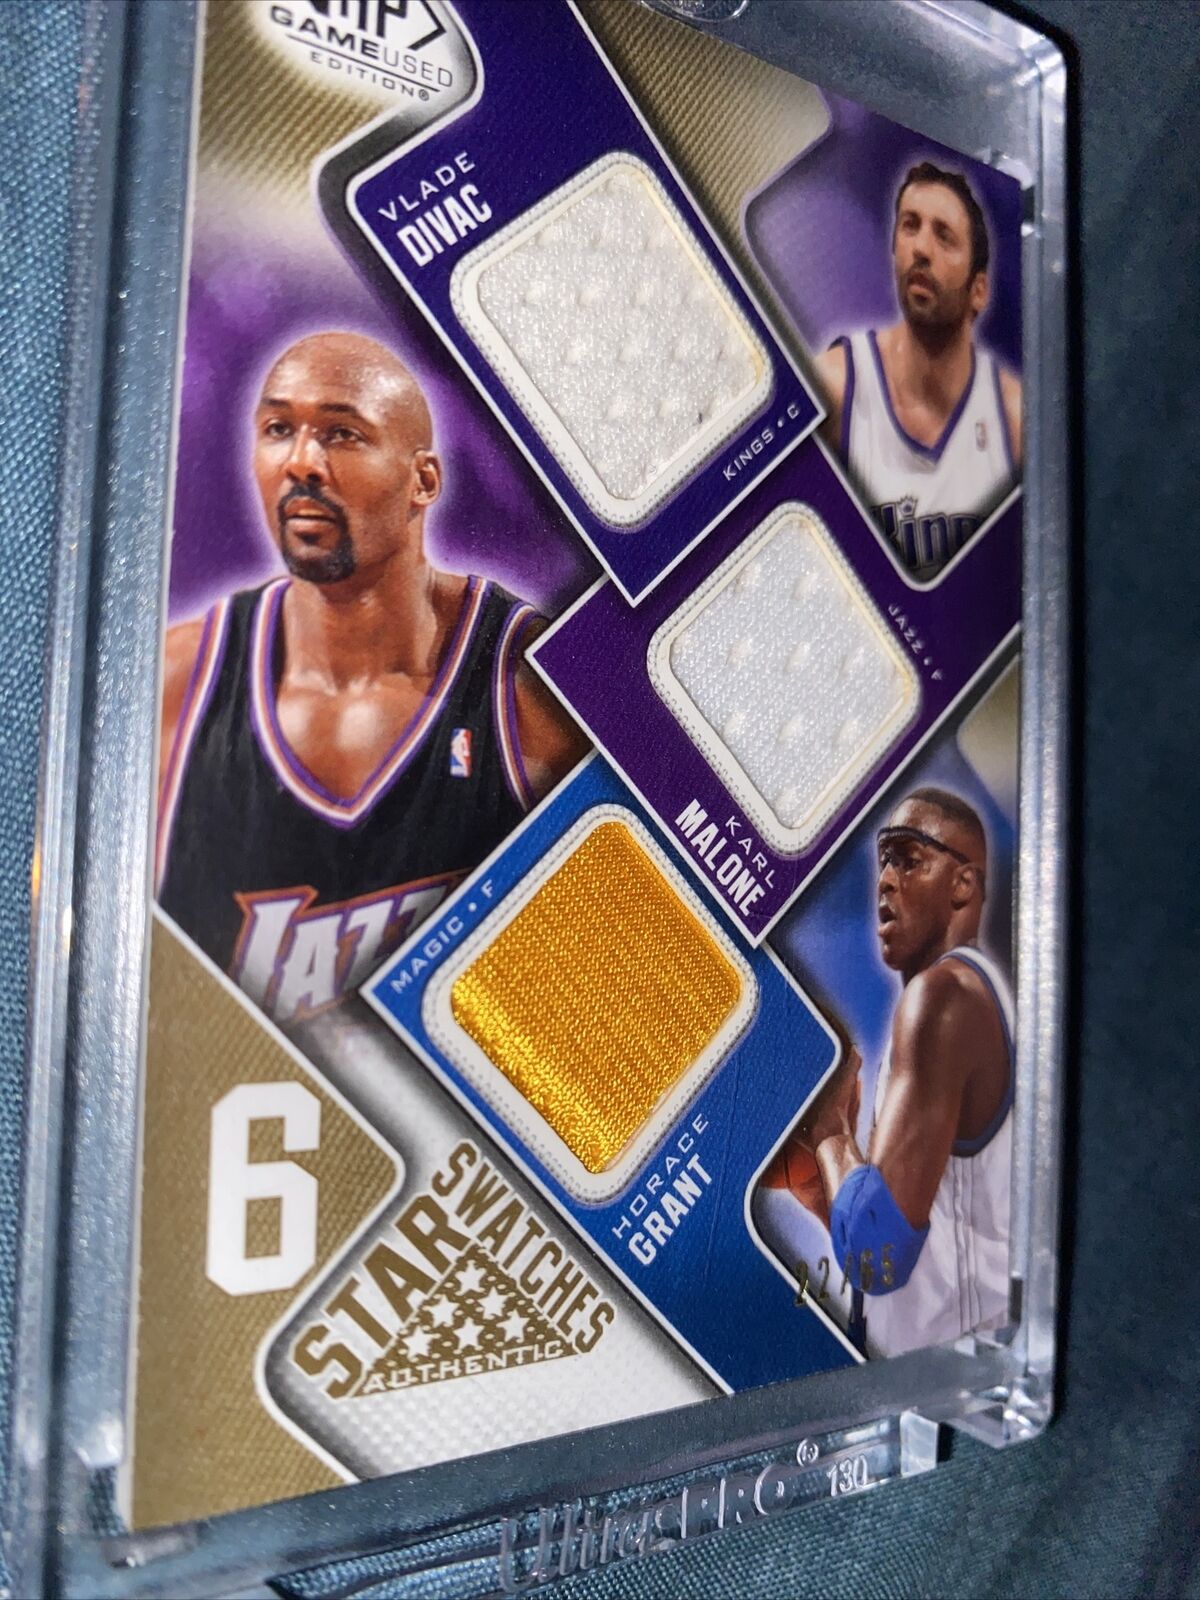 2007 SP Game Used  6 Star Swatches Kobe Bryant, Shaquille O’Neal Jersey Card